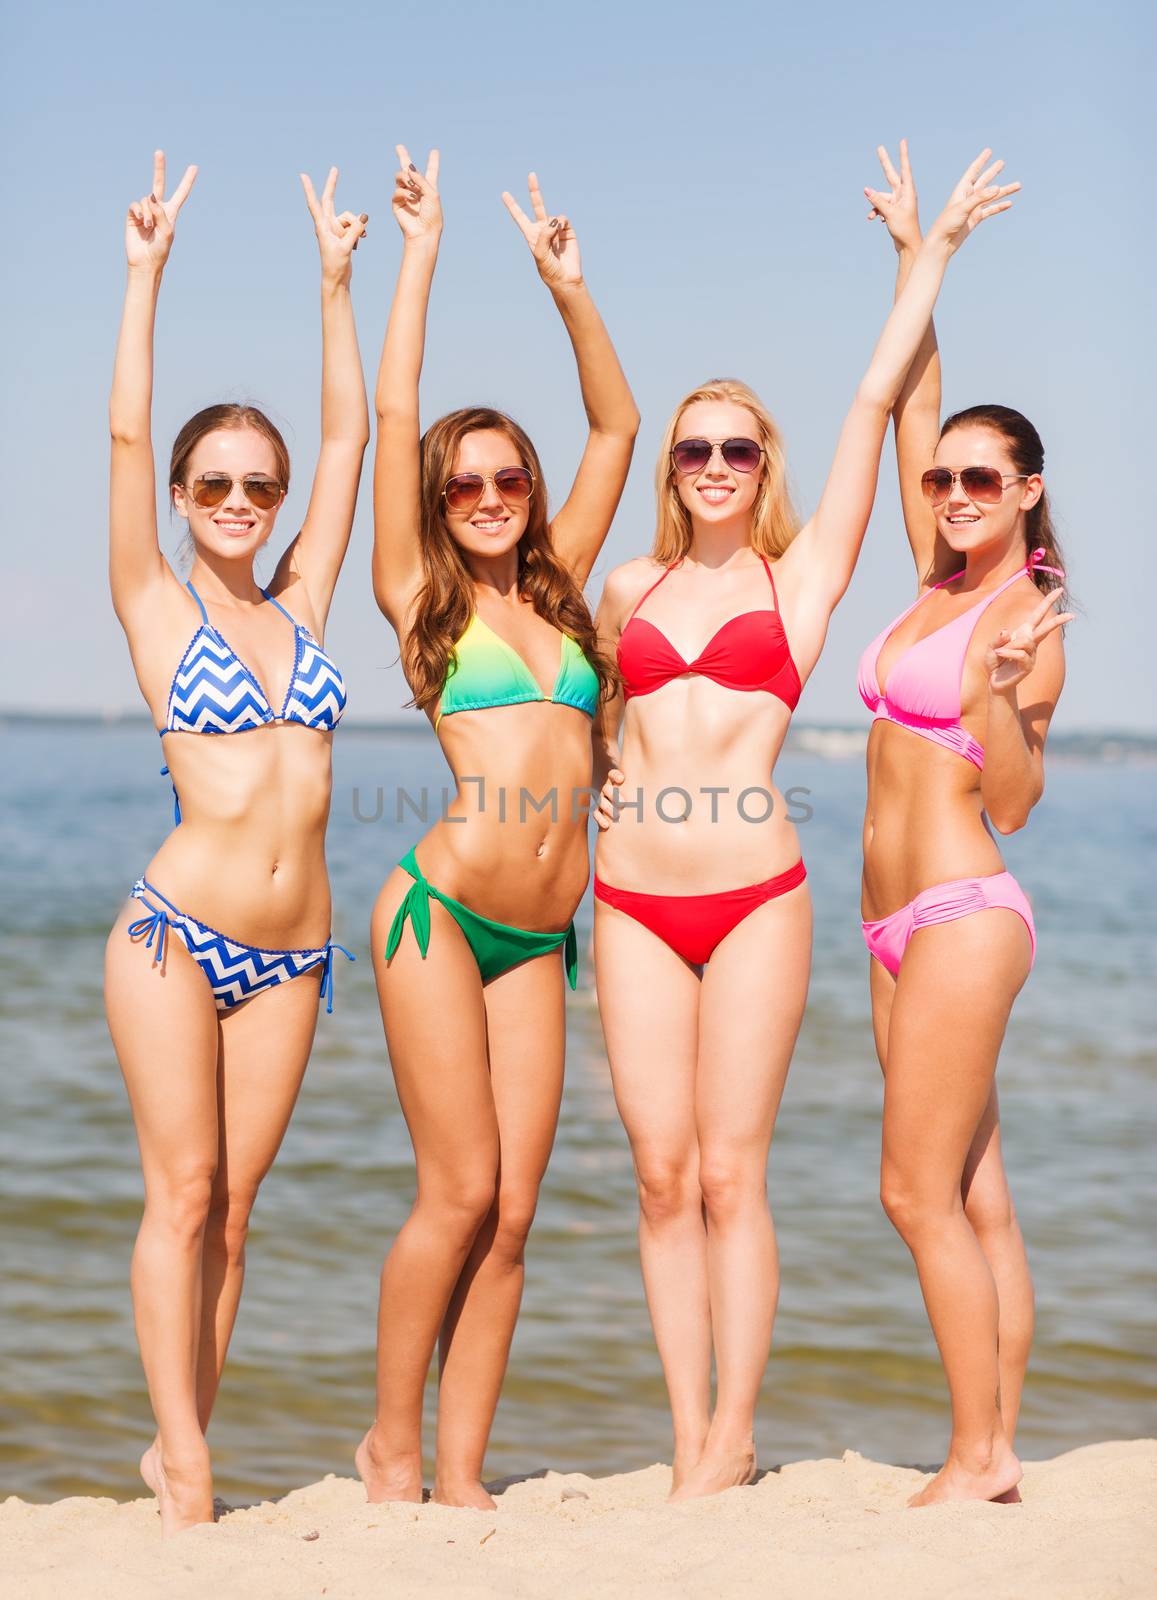 summer vacation, holidays, gesture, travel and people concept - group of smiling young women showing peace or victory sign on beach